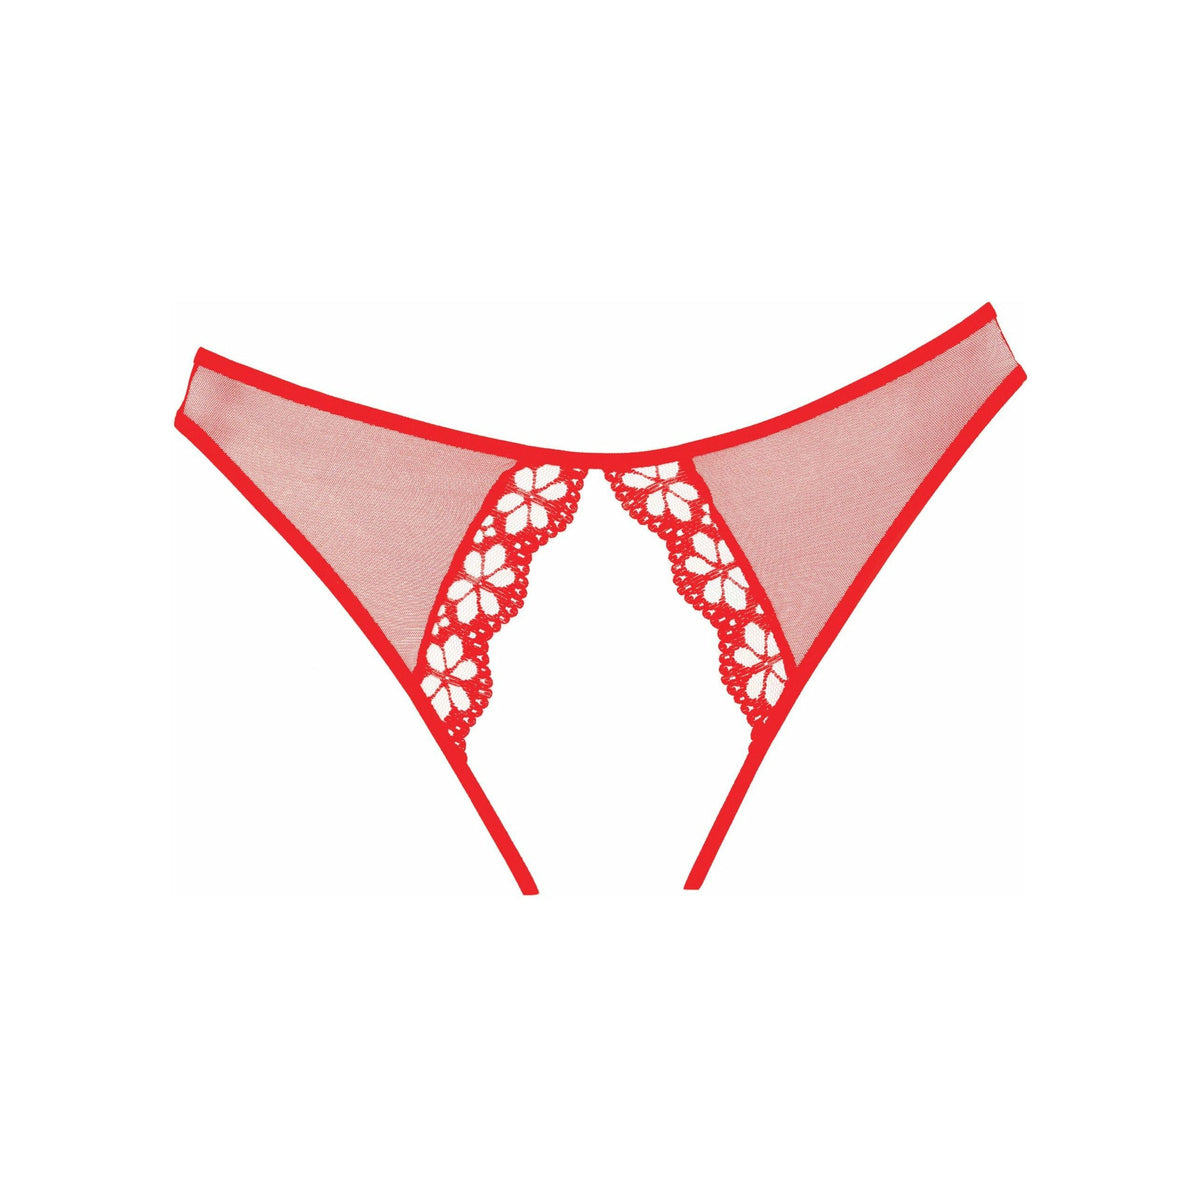 Allure Adore – Mirabelle Plum Panty – Red – One Size